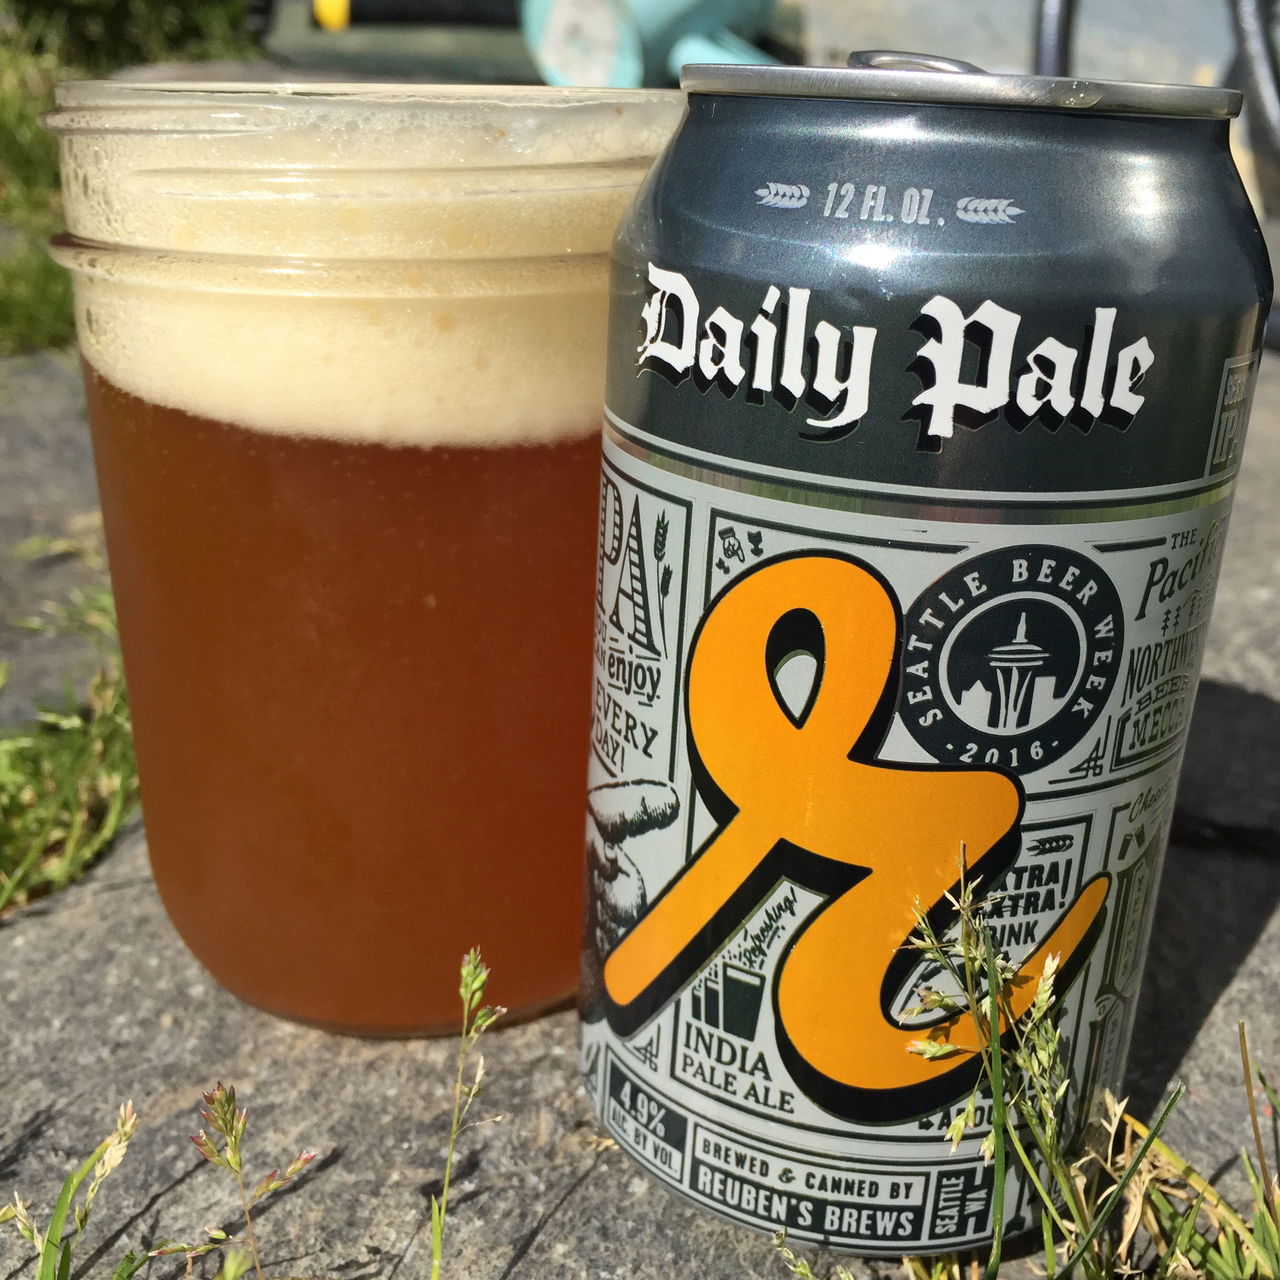 The Daily Pale was made for Seattle Beer Week.